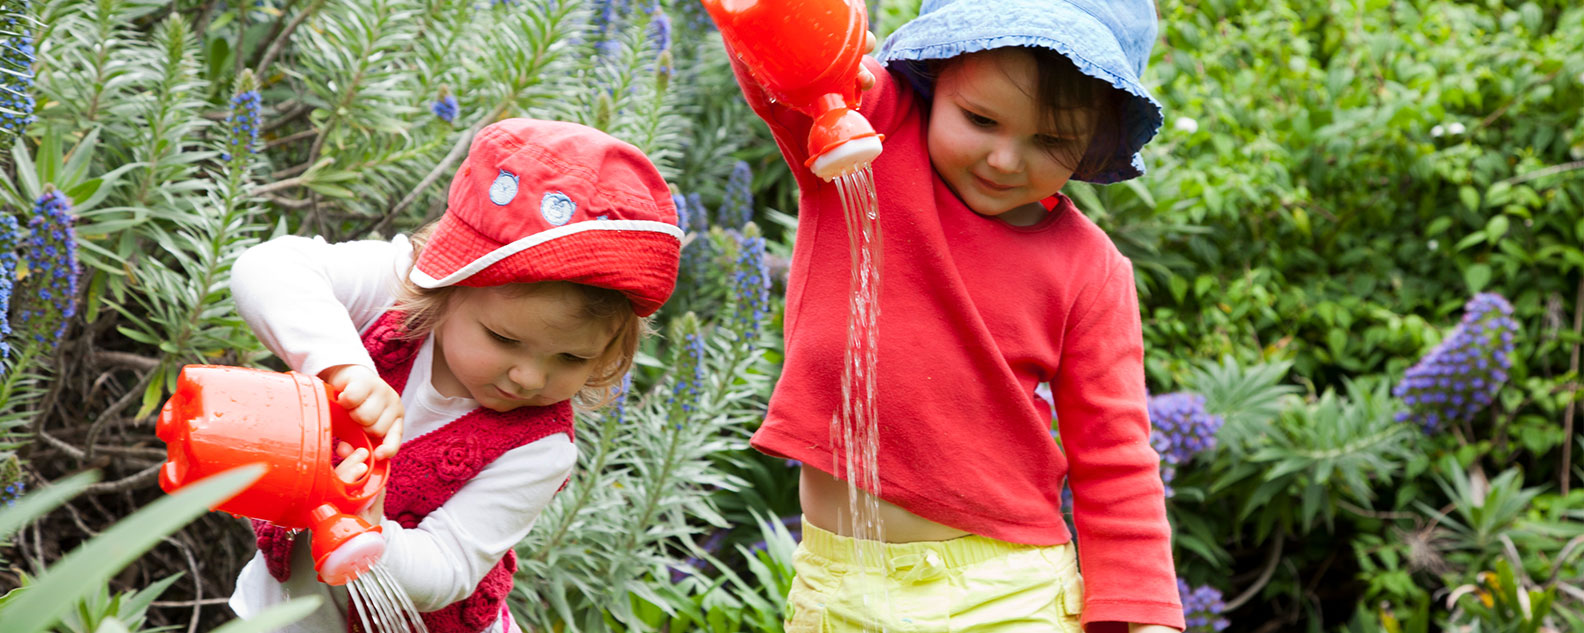 Two young children watering plants during Nature Play